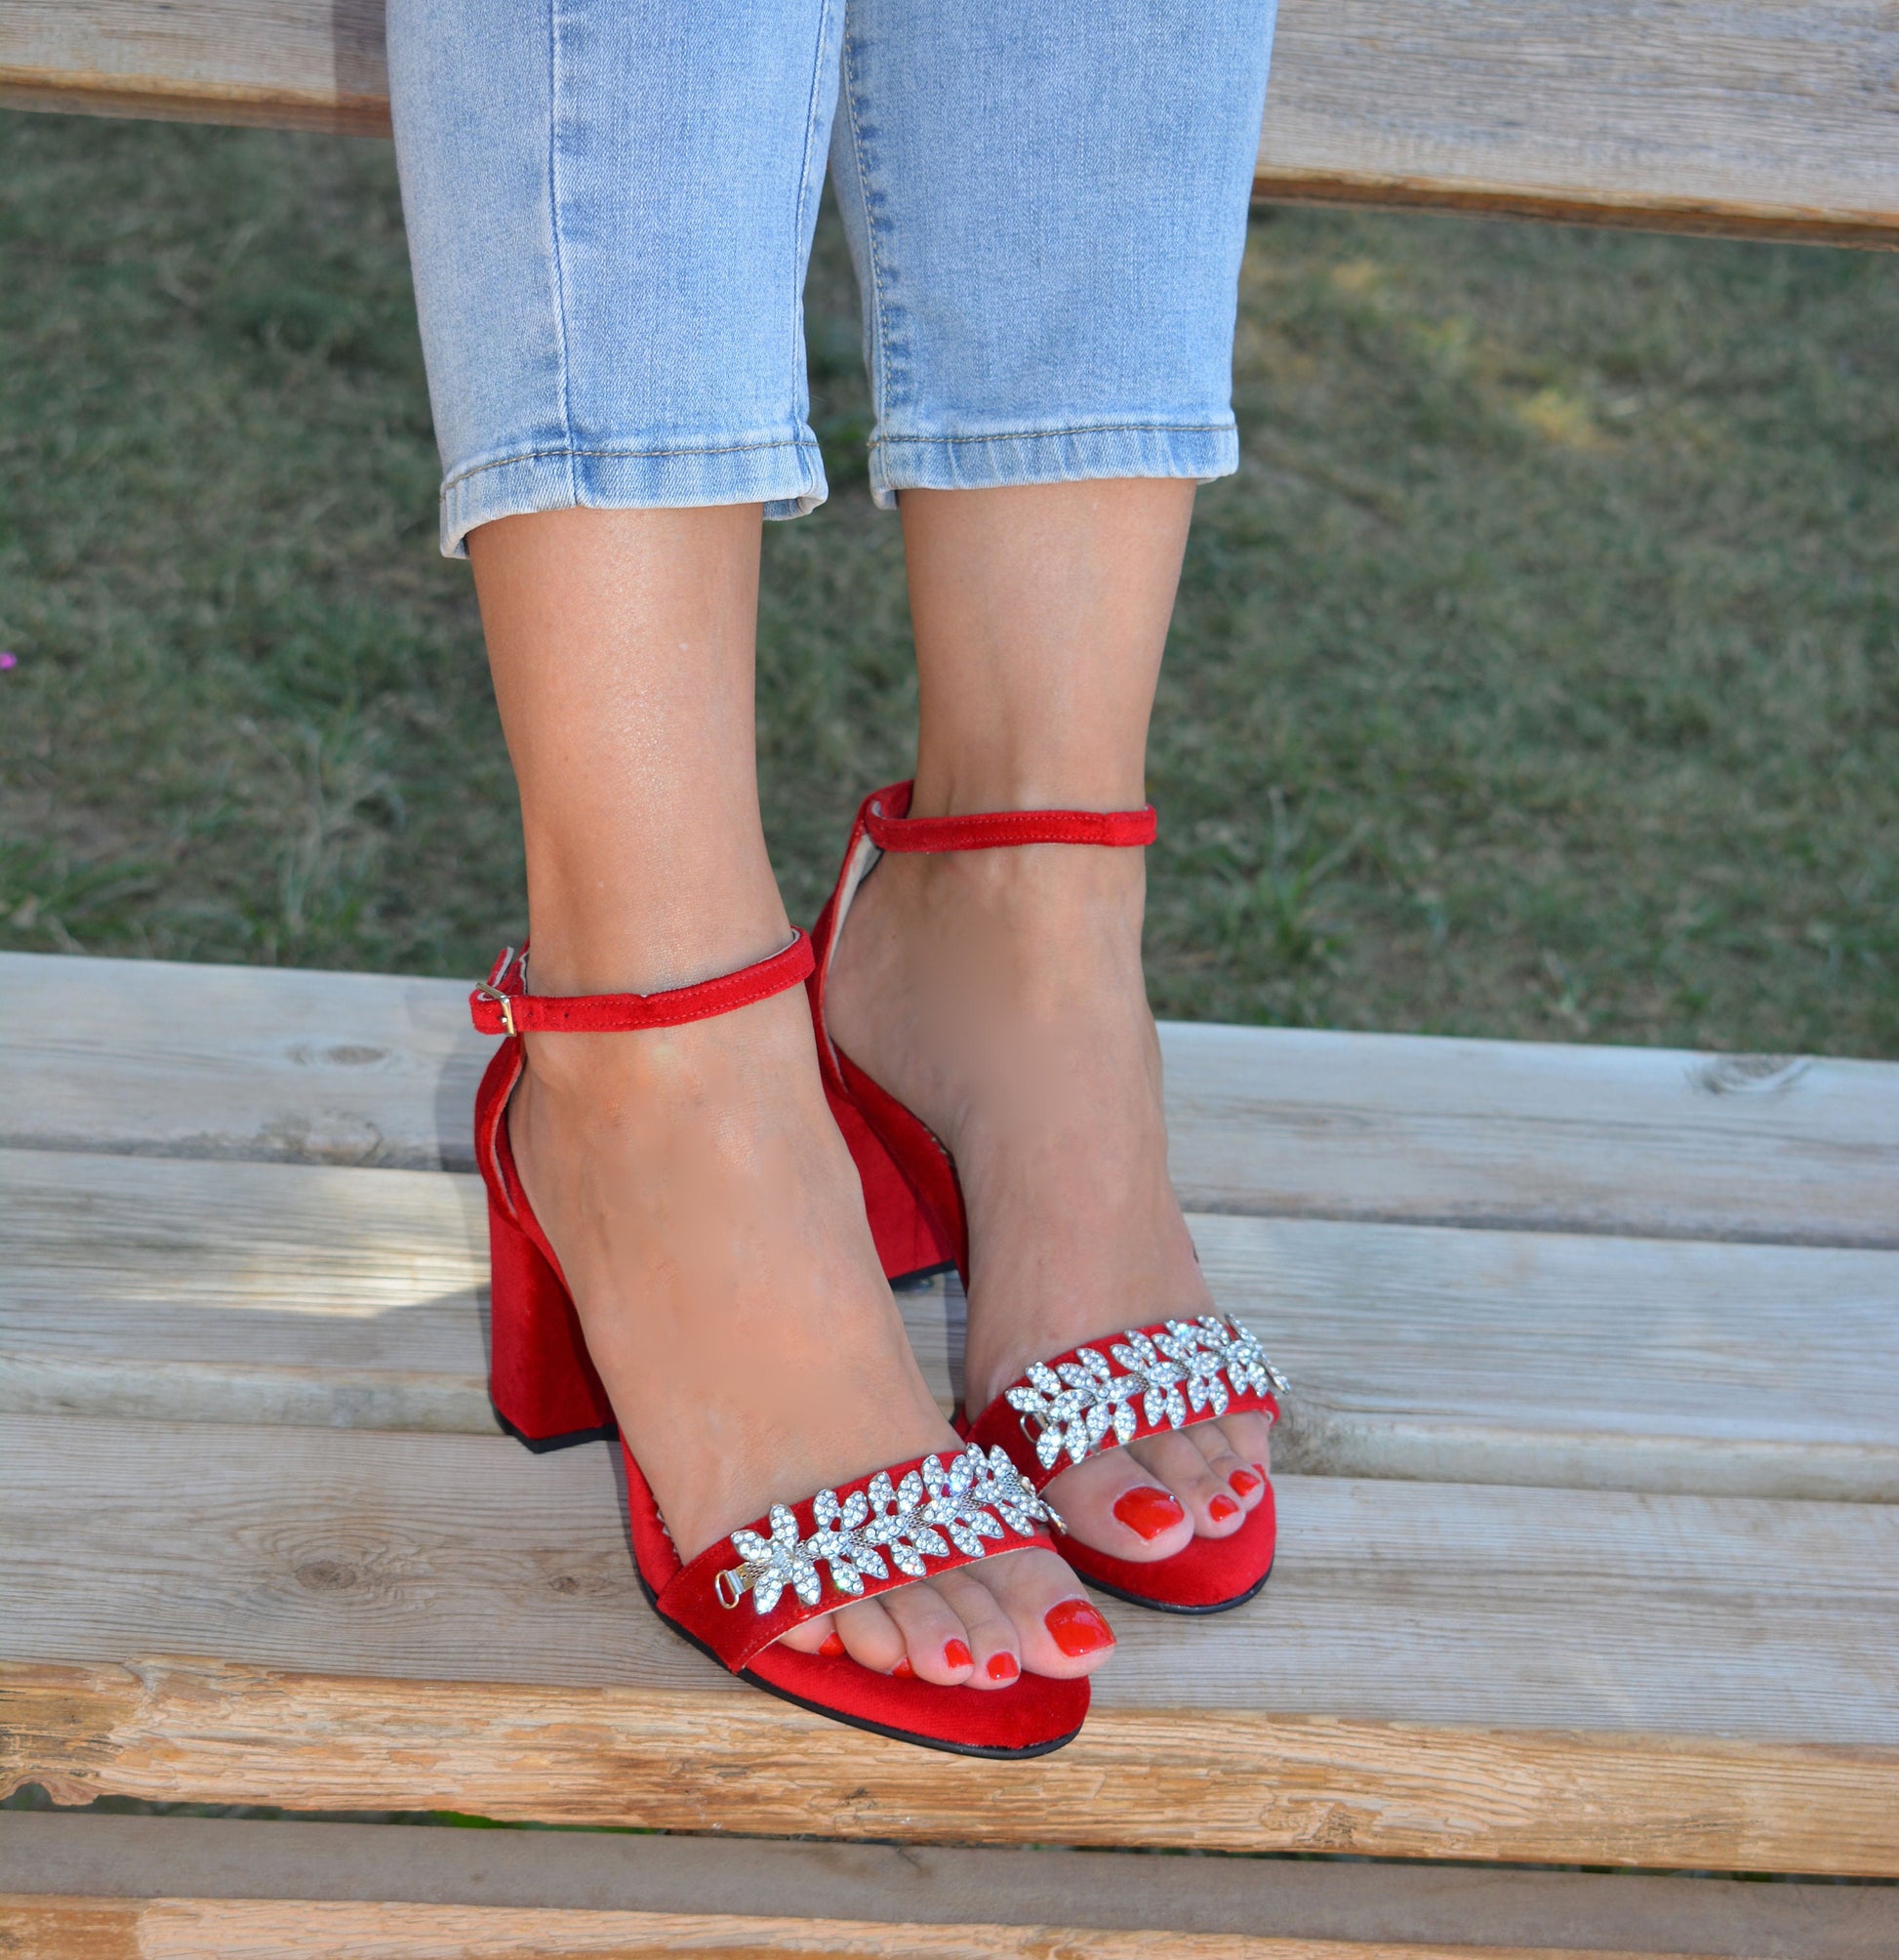 One Of My Favorite Ways to Wear Read Shoes - My Style Vita